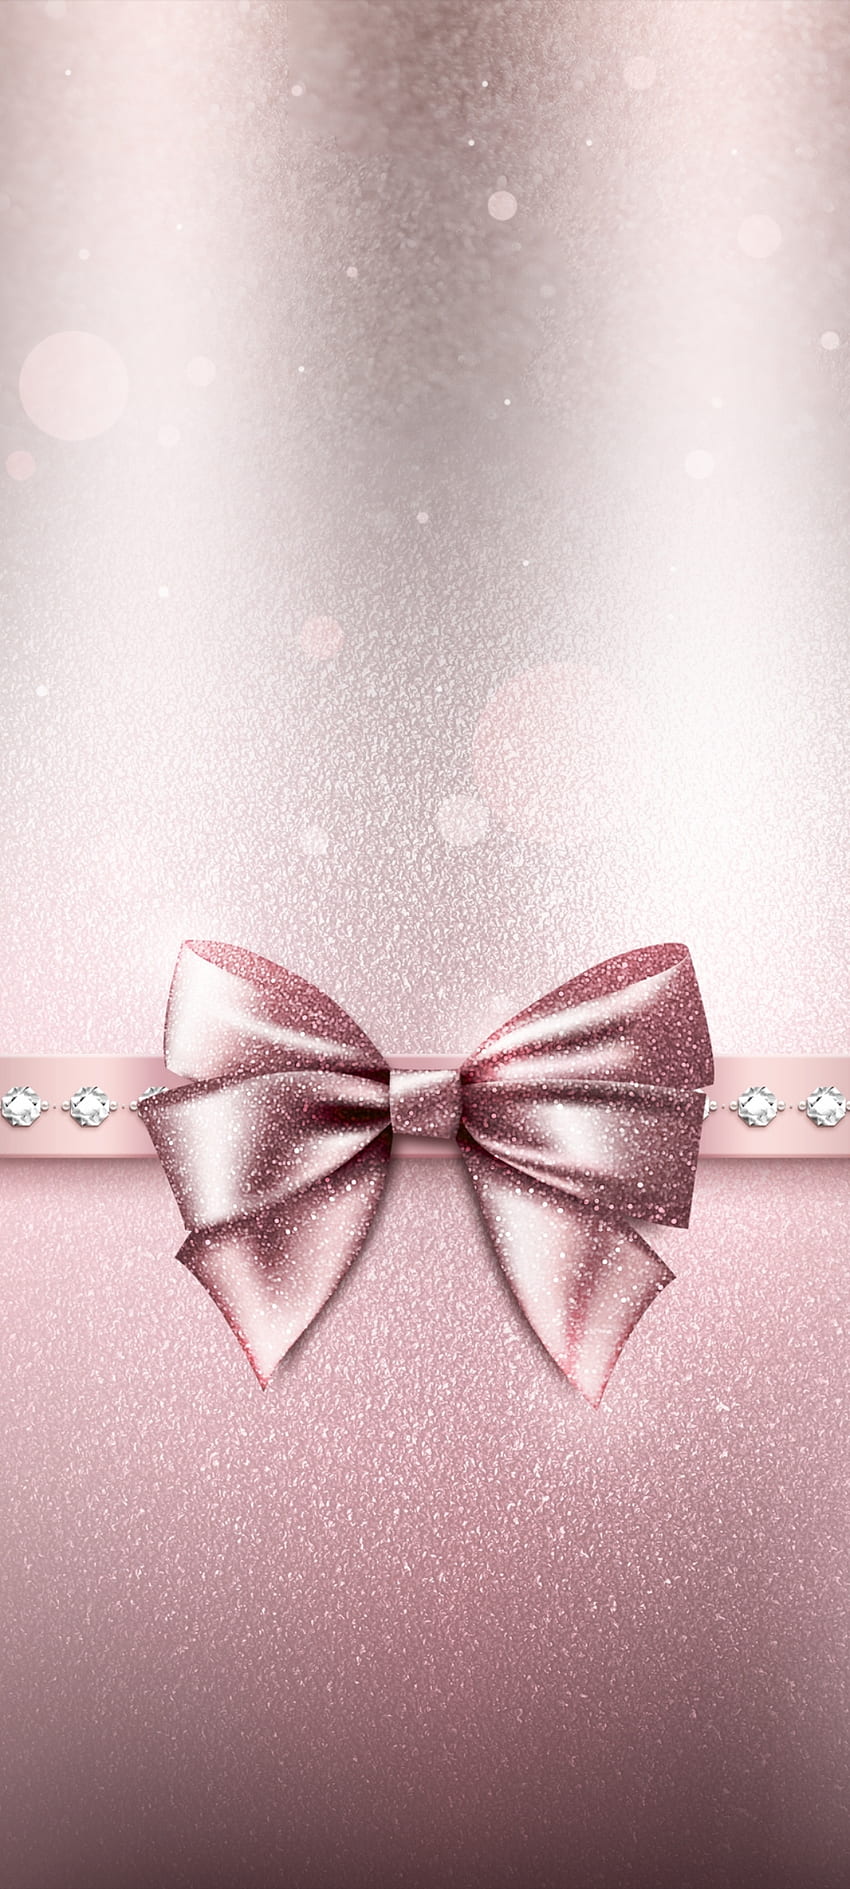 Download Ribbon Wallpaper by Victoria0802  dd  Free on ZEDGE now Browse  millions of popular abstract Wallpapers and R  Золотистые обои Винтажные  рамы Золото